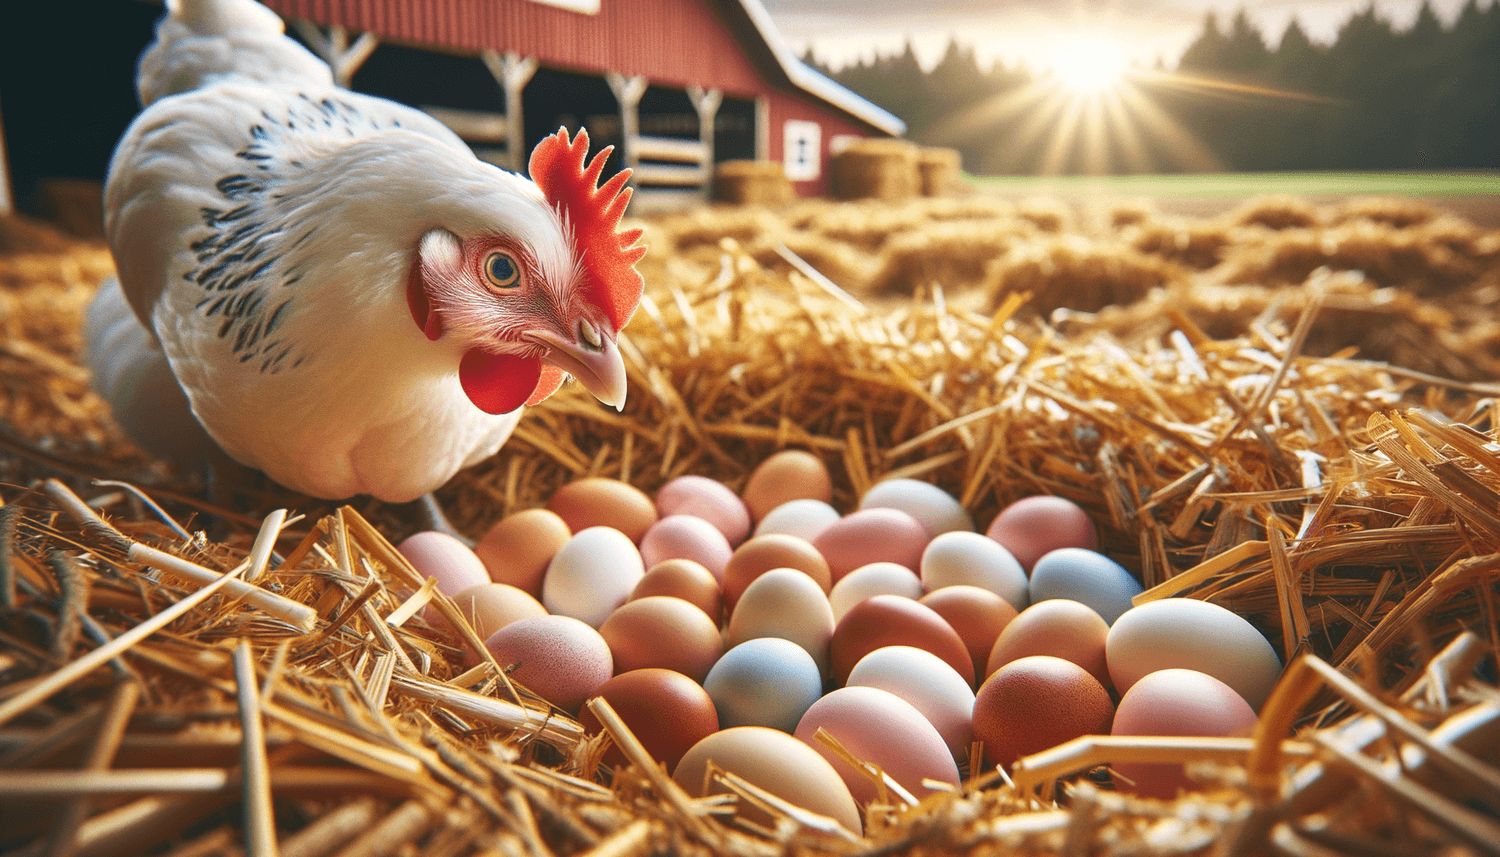 Can Chickens Eat Their Own Eggs?